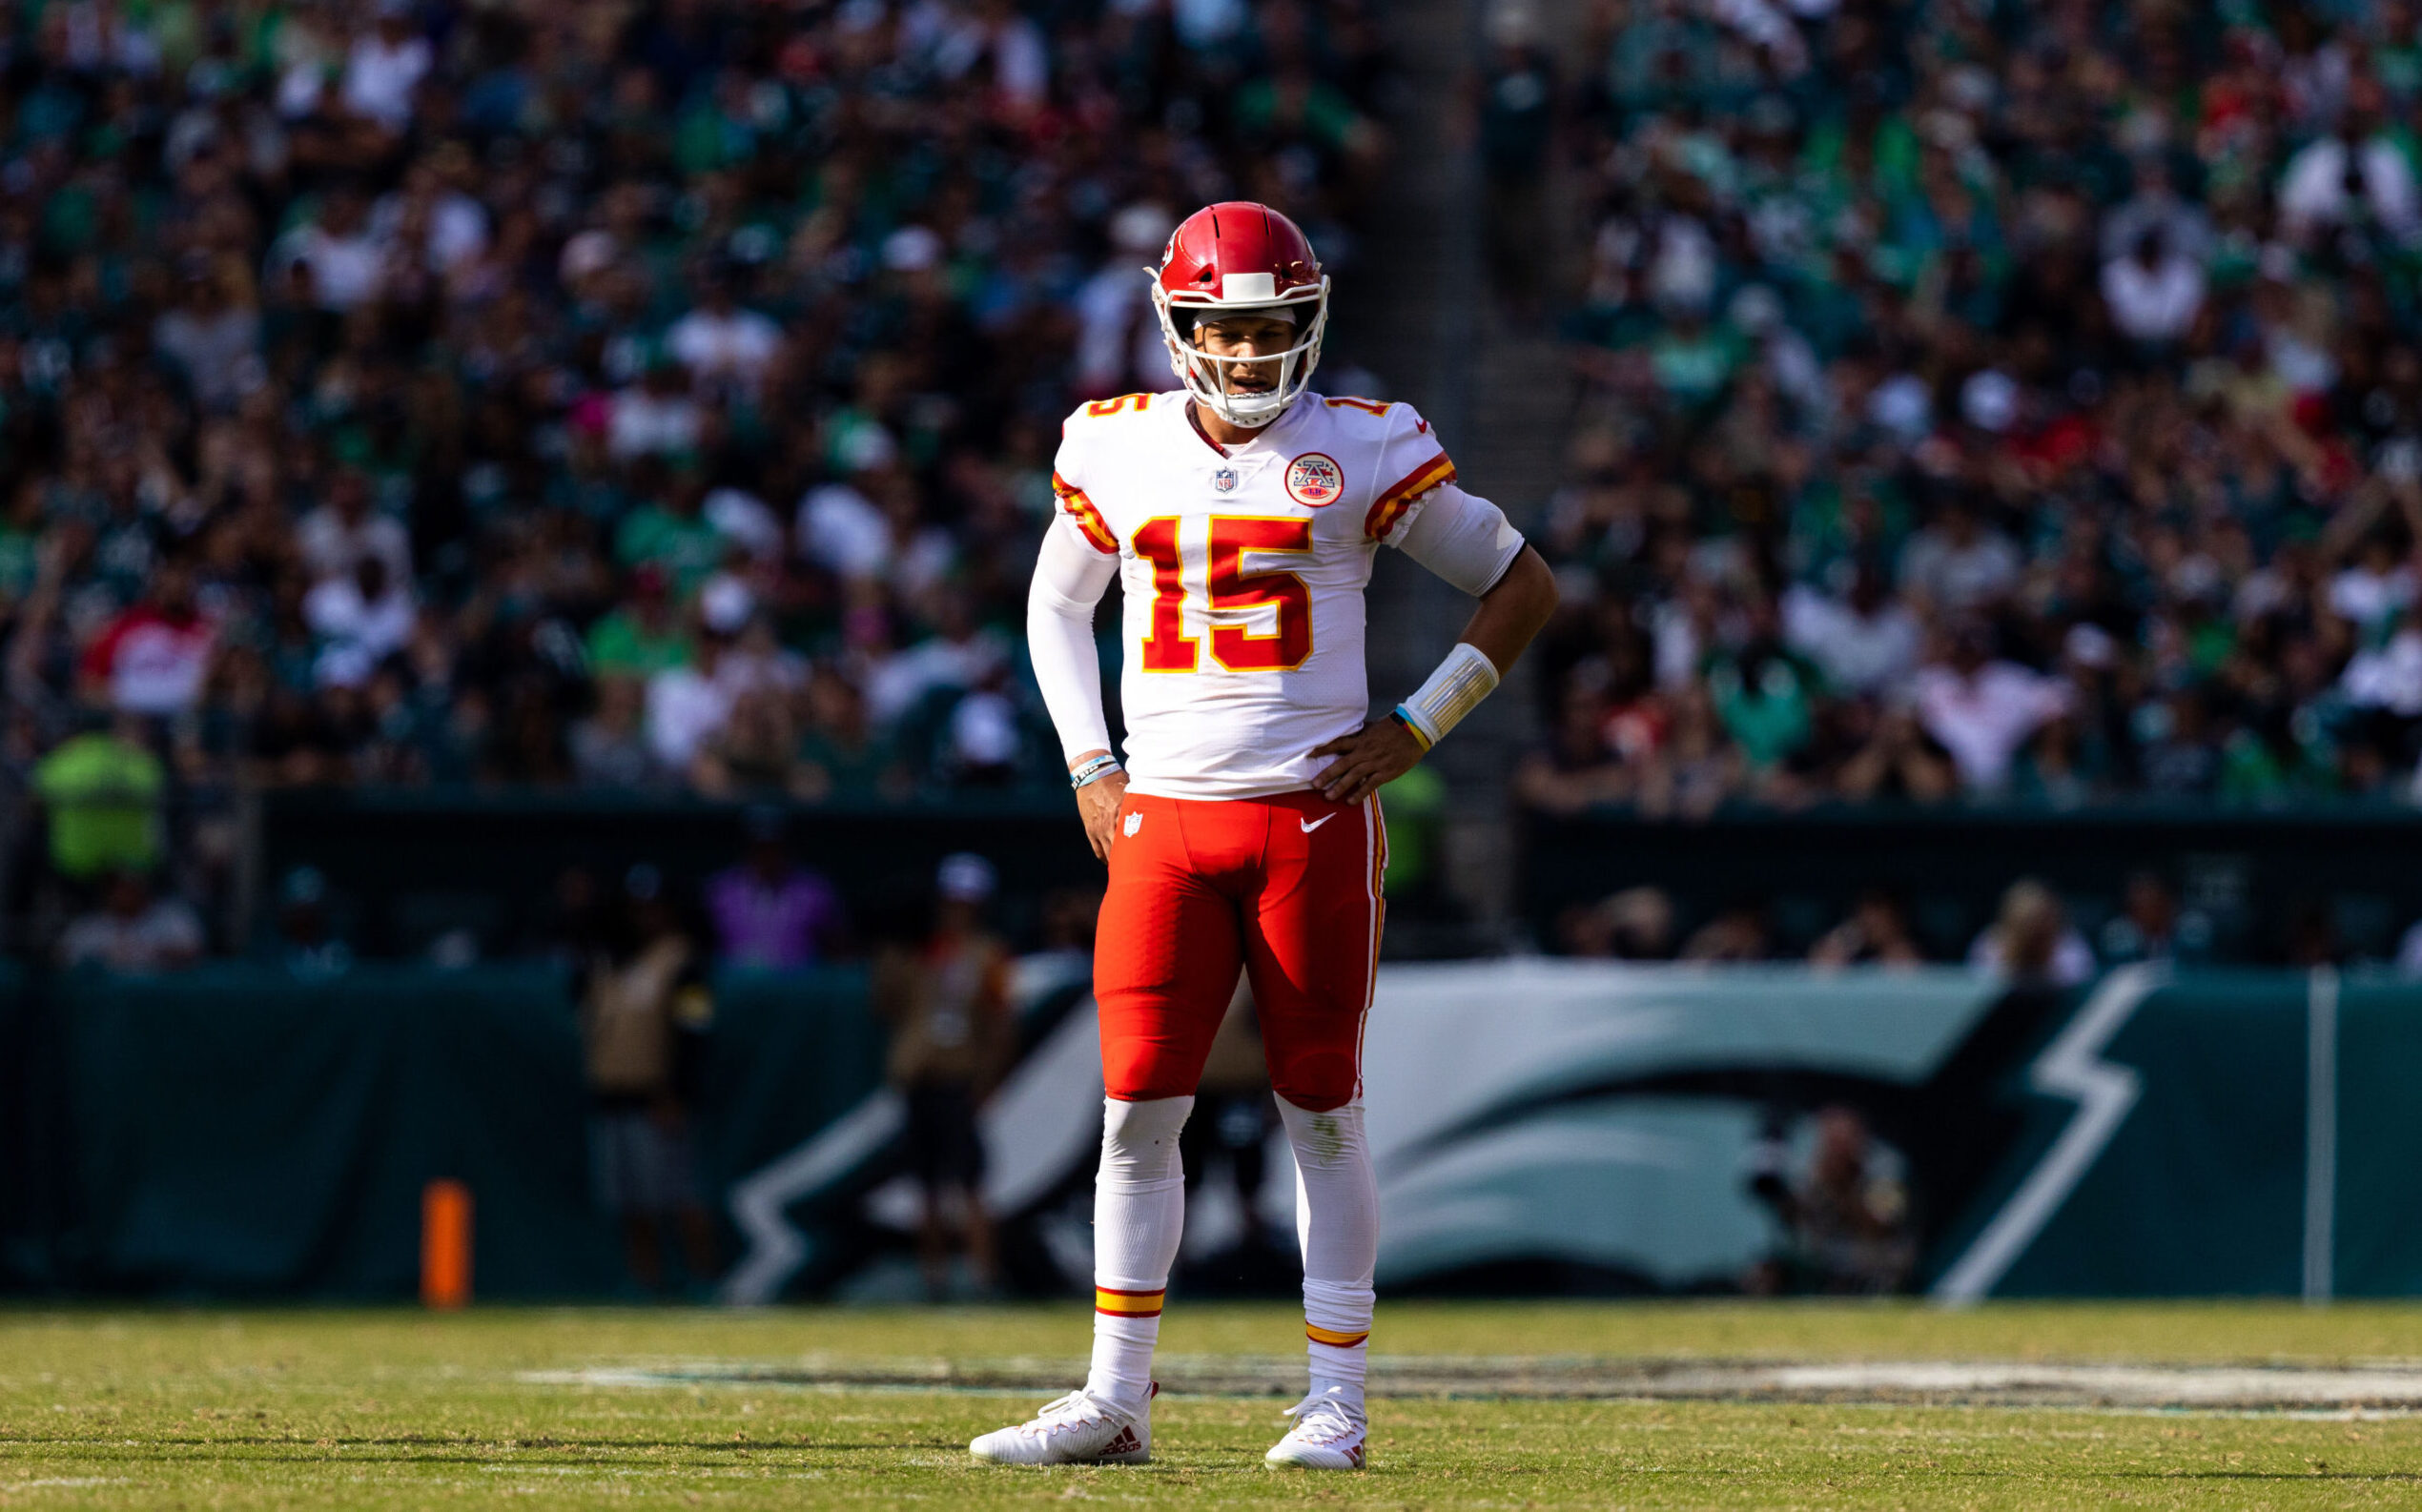 Chiefs’ Mahomes Not Limited by Injury, Can Do ‘Just About Everything’